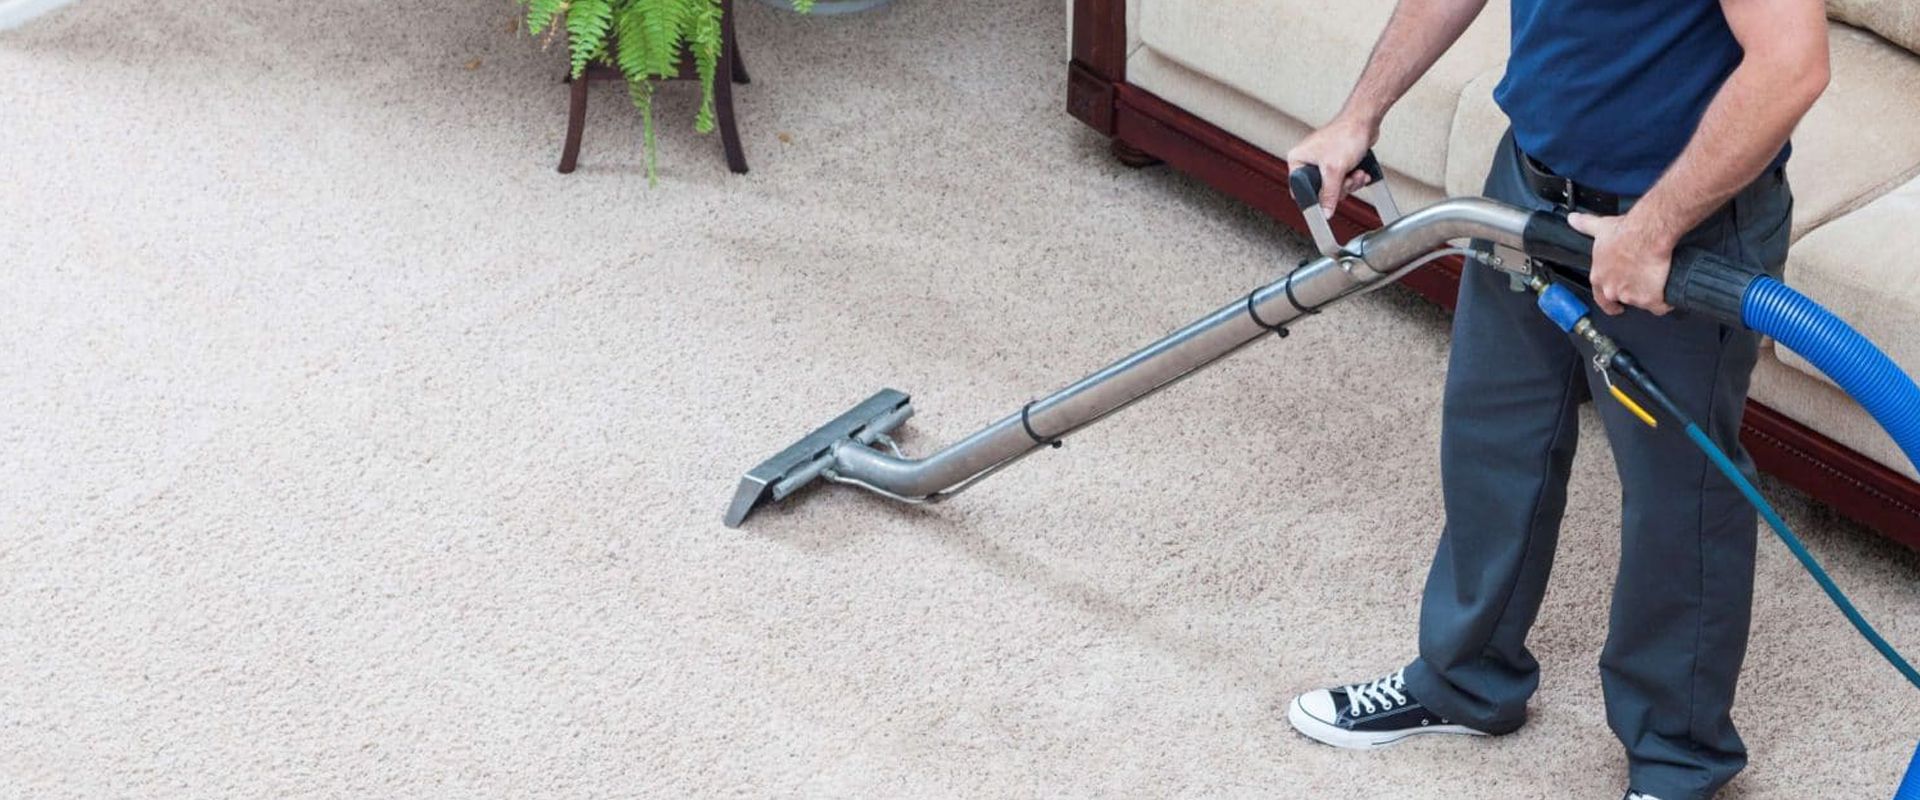 Cost Effectiveness of our Carpet Cleaning Services